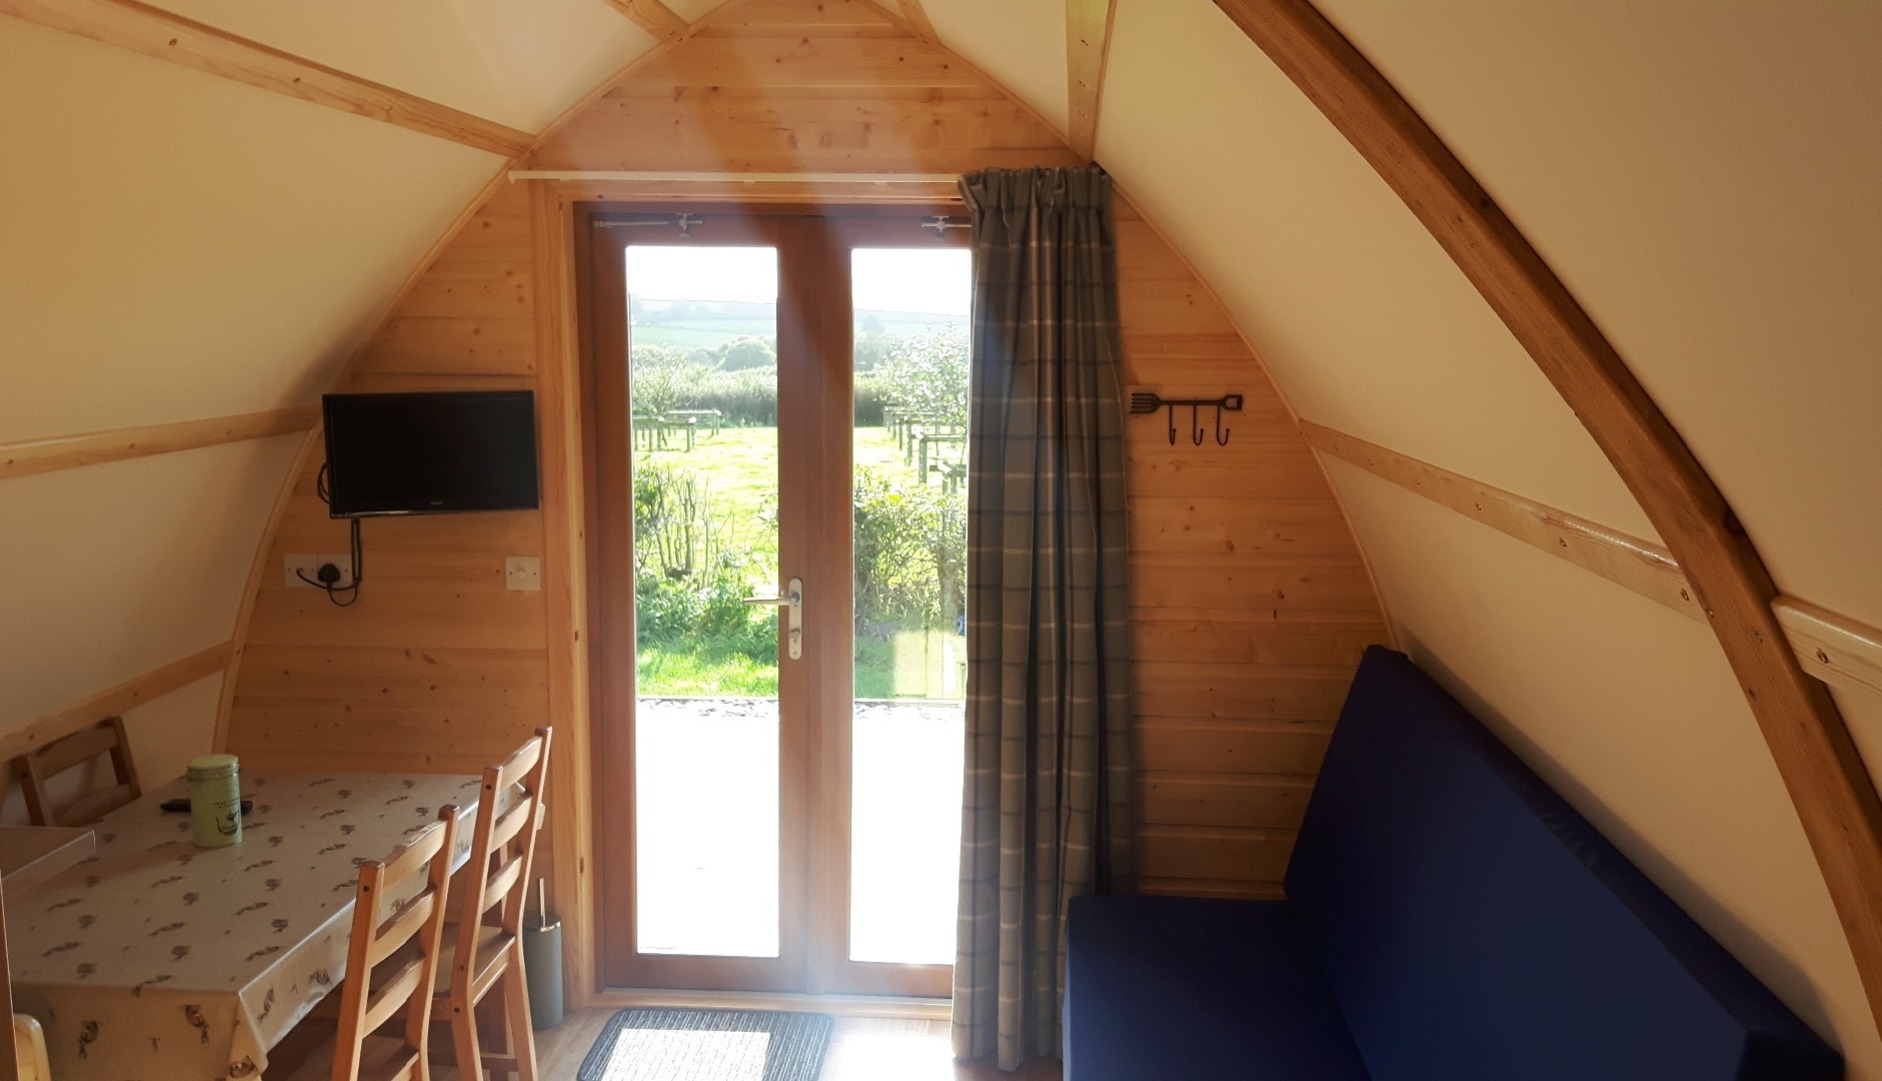 View from inside our Glamping Cabin in North Devon